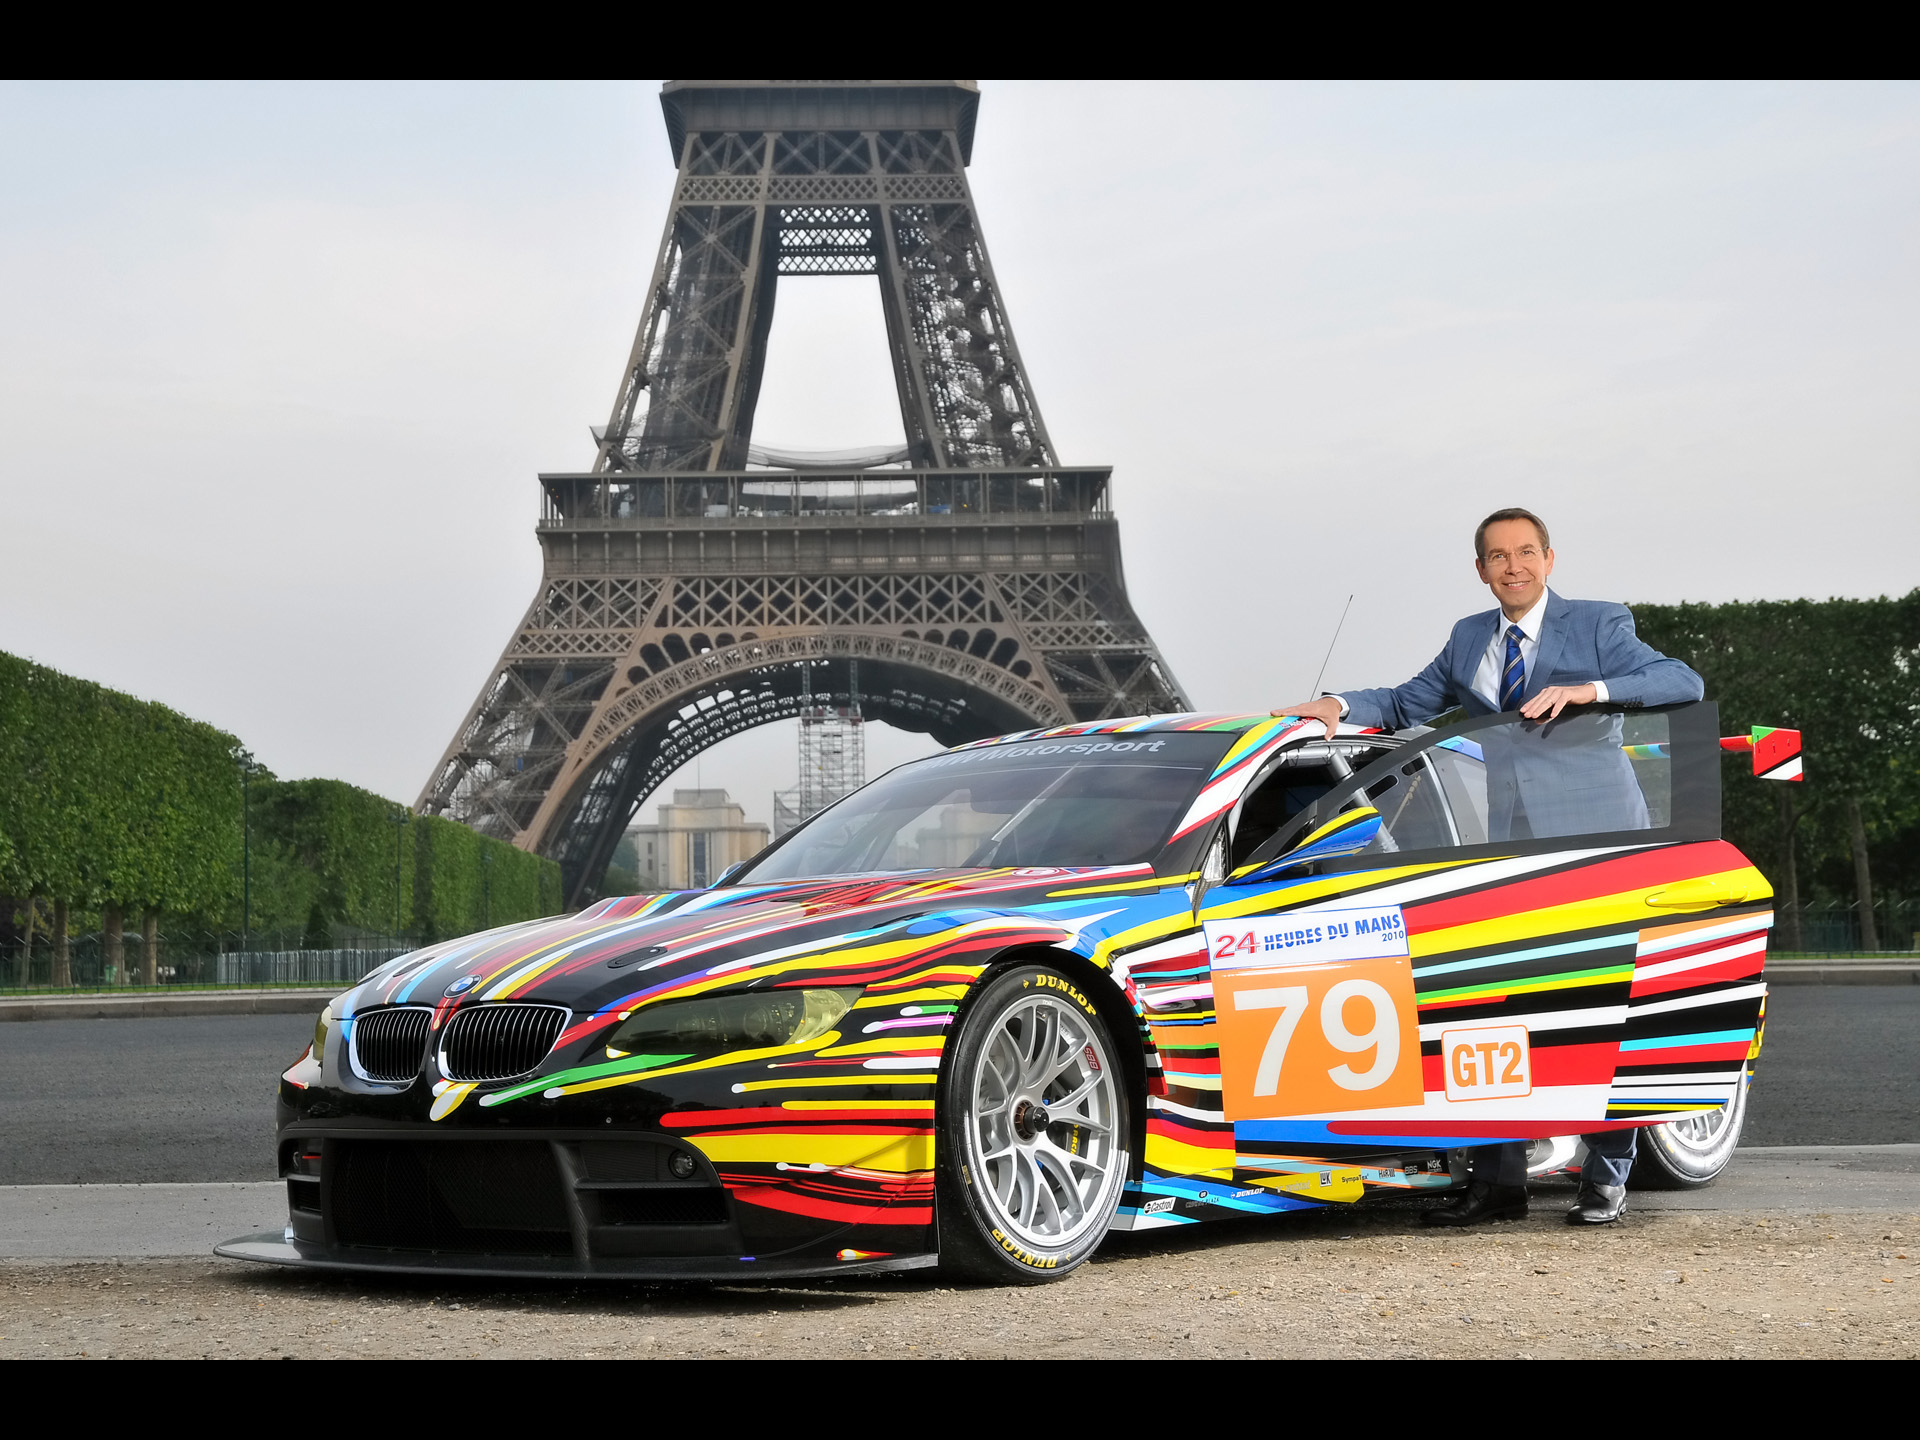 Bmw M3 Gt2 Art Car By Jeff Koons At Tour Eiffel In